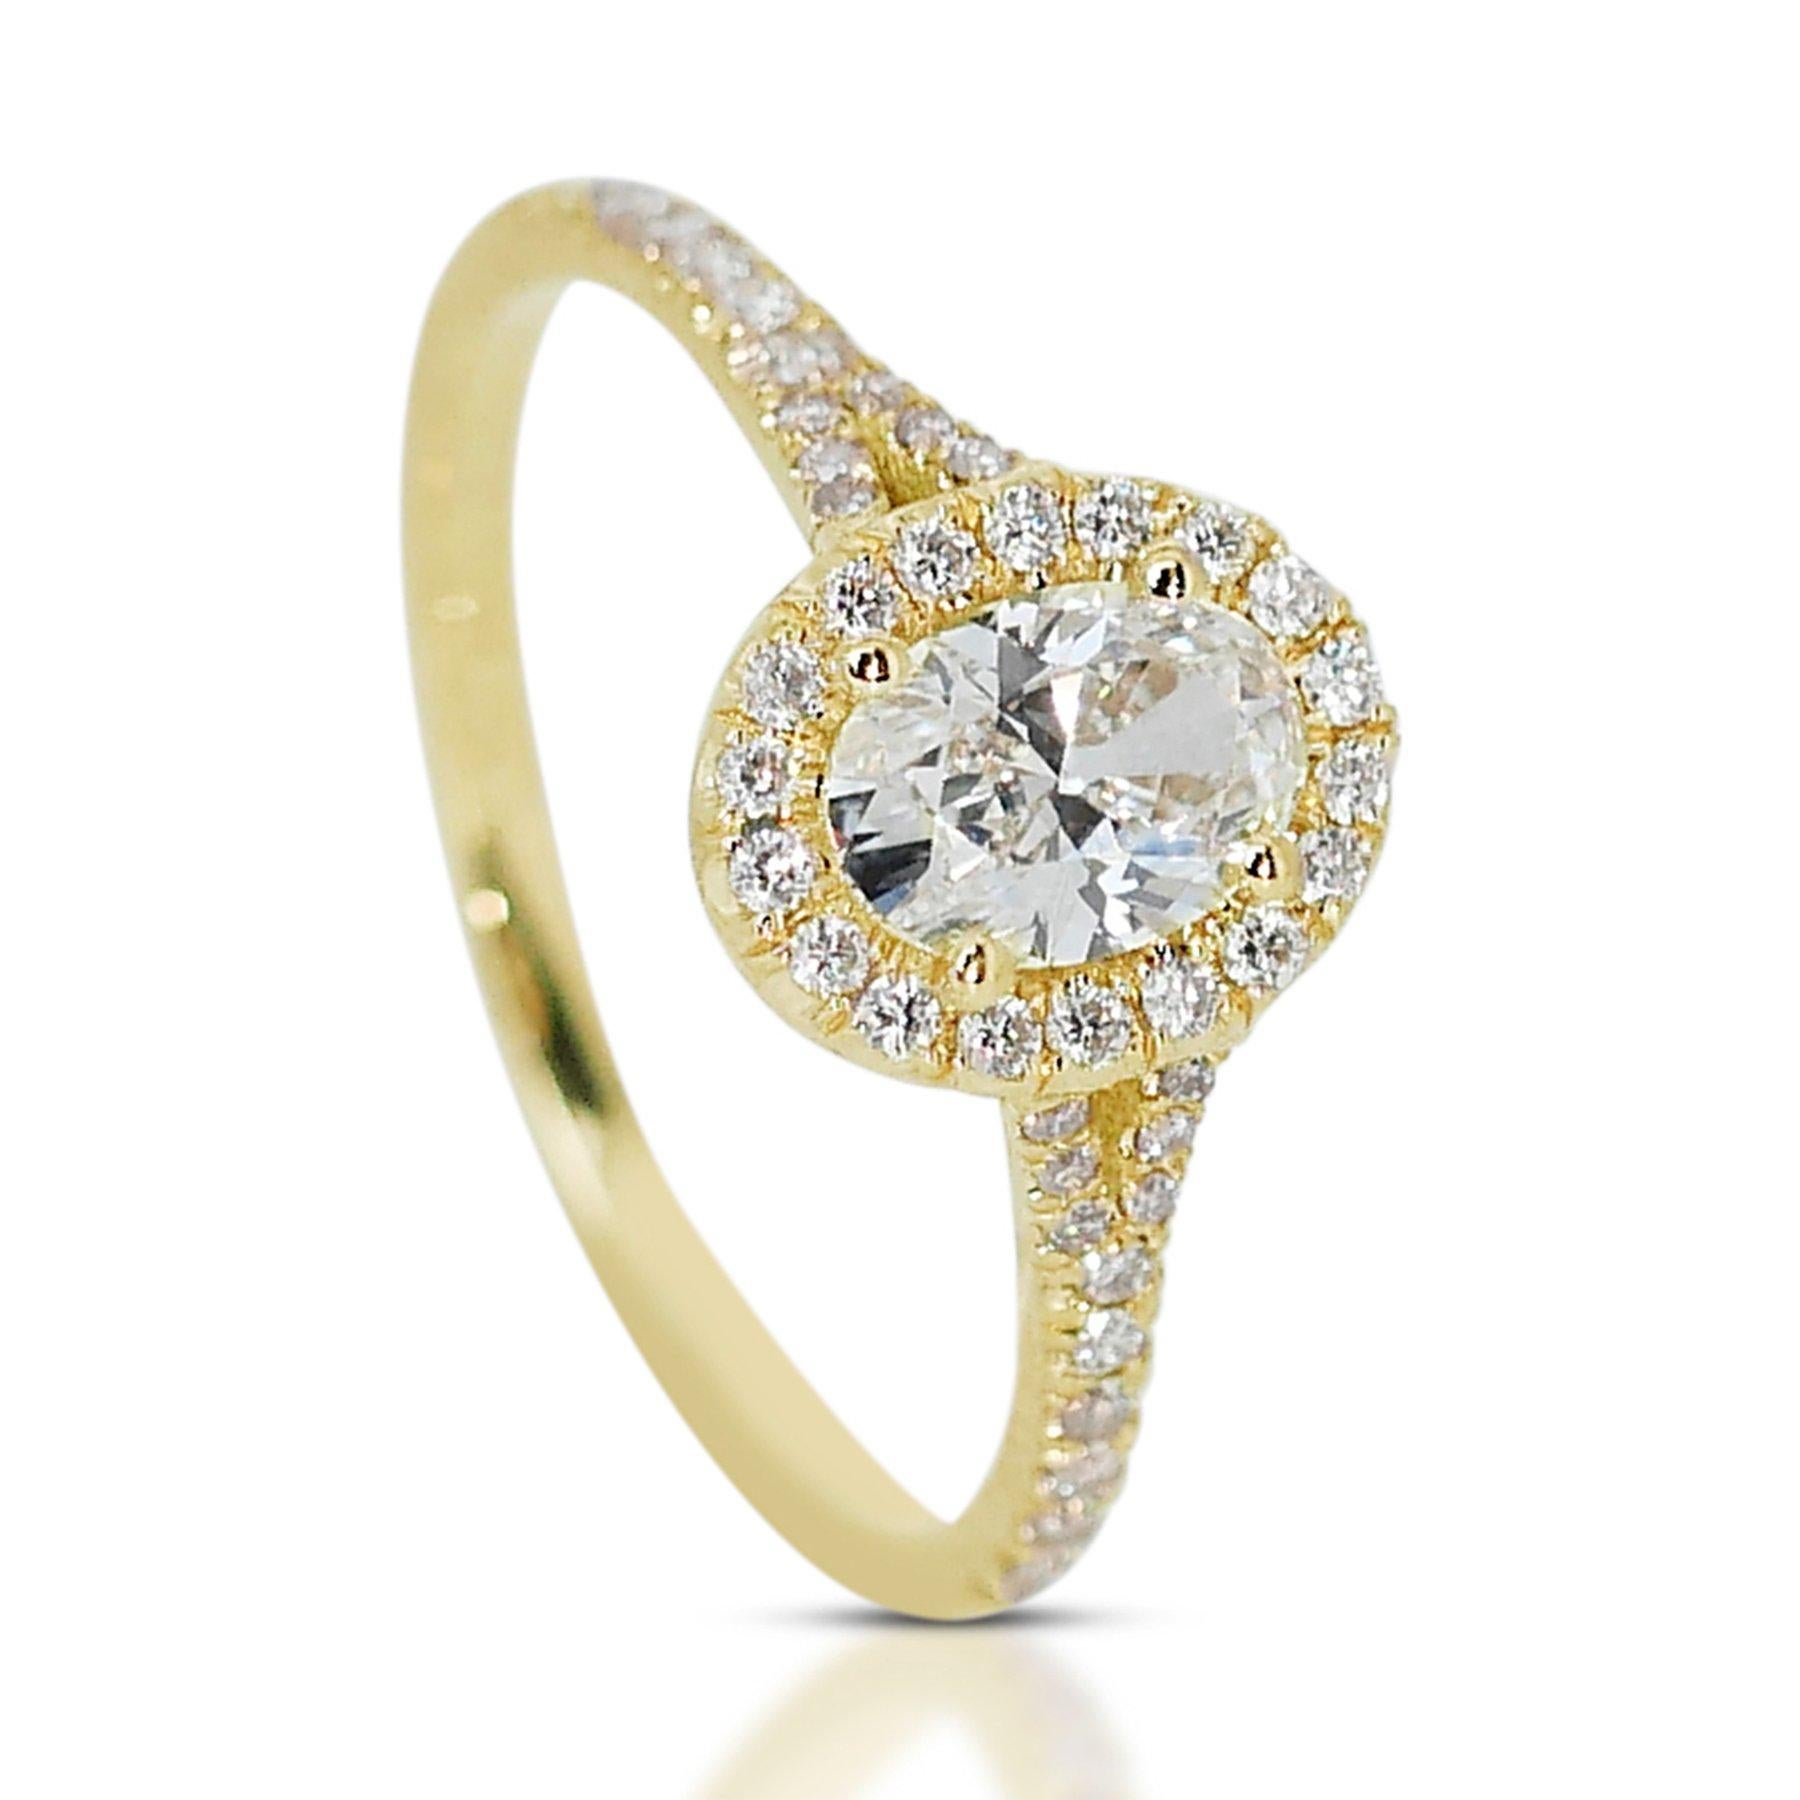 Stunning 1.05 ct Ideal Cut Oval Diamond Halo Ring with split shank  in 18k Yellow Gold – GIA Certified

Crafted in elegant 18k yellow gold, this halo ring features a captivating 0.75-carat oval diamond. Encircling the main diamond are 44 round side